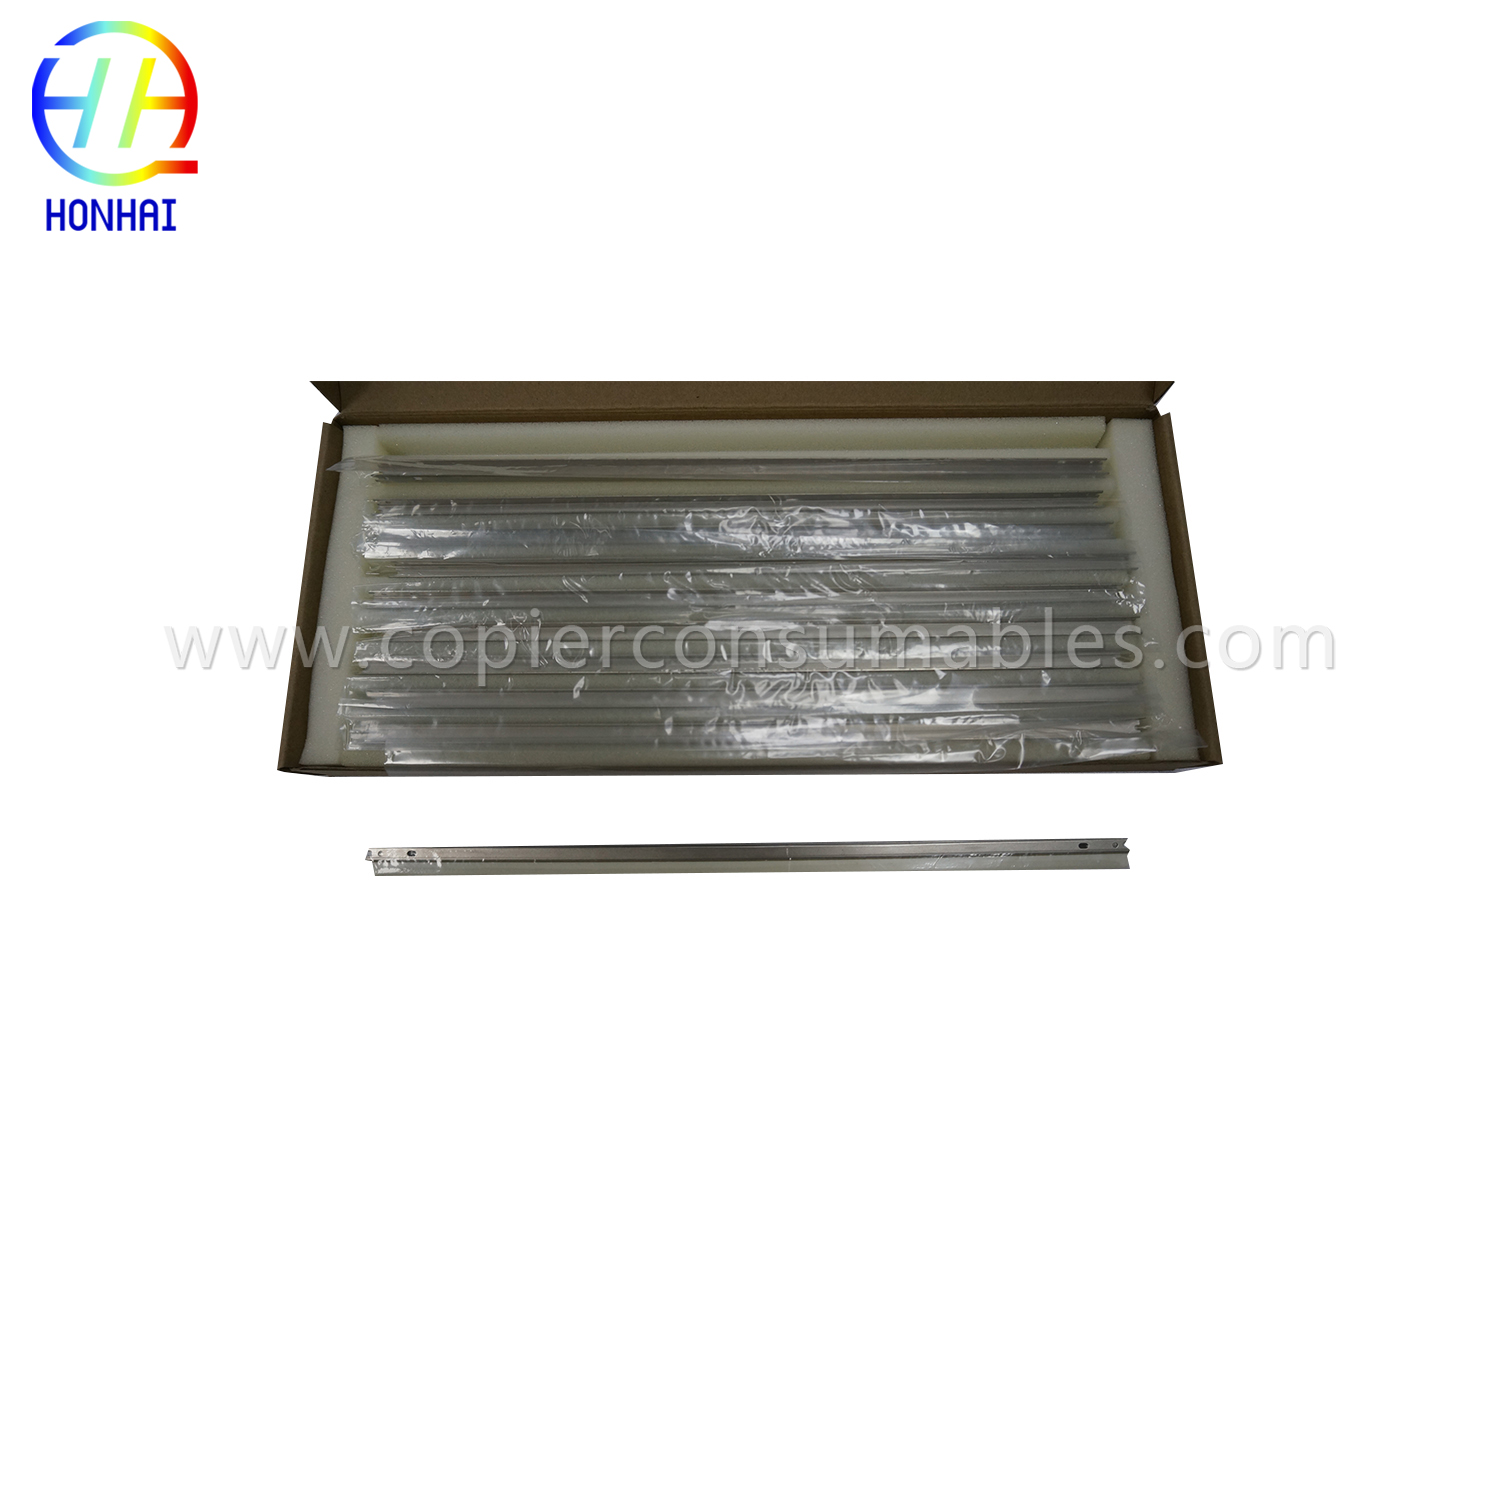 New Delivery for Parts Of Printer Inside - Lubricant Bar for Ricoh MP2500 3500 3000 – HONHAI